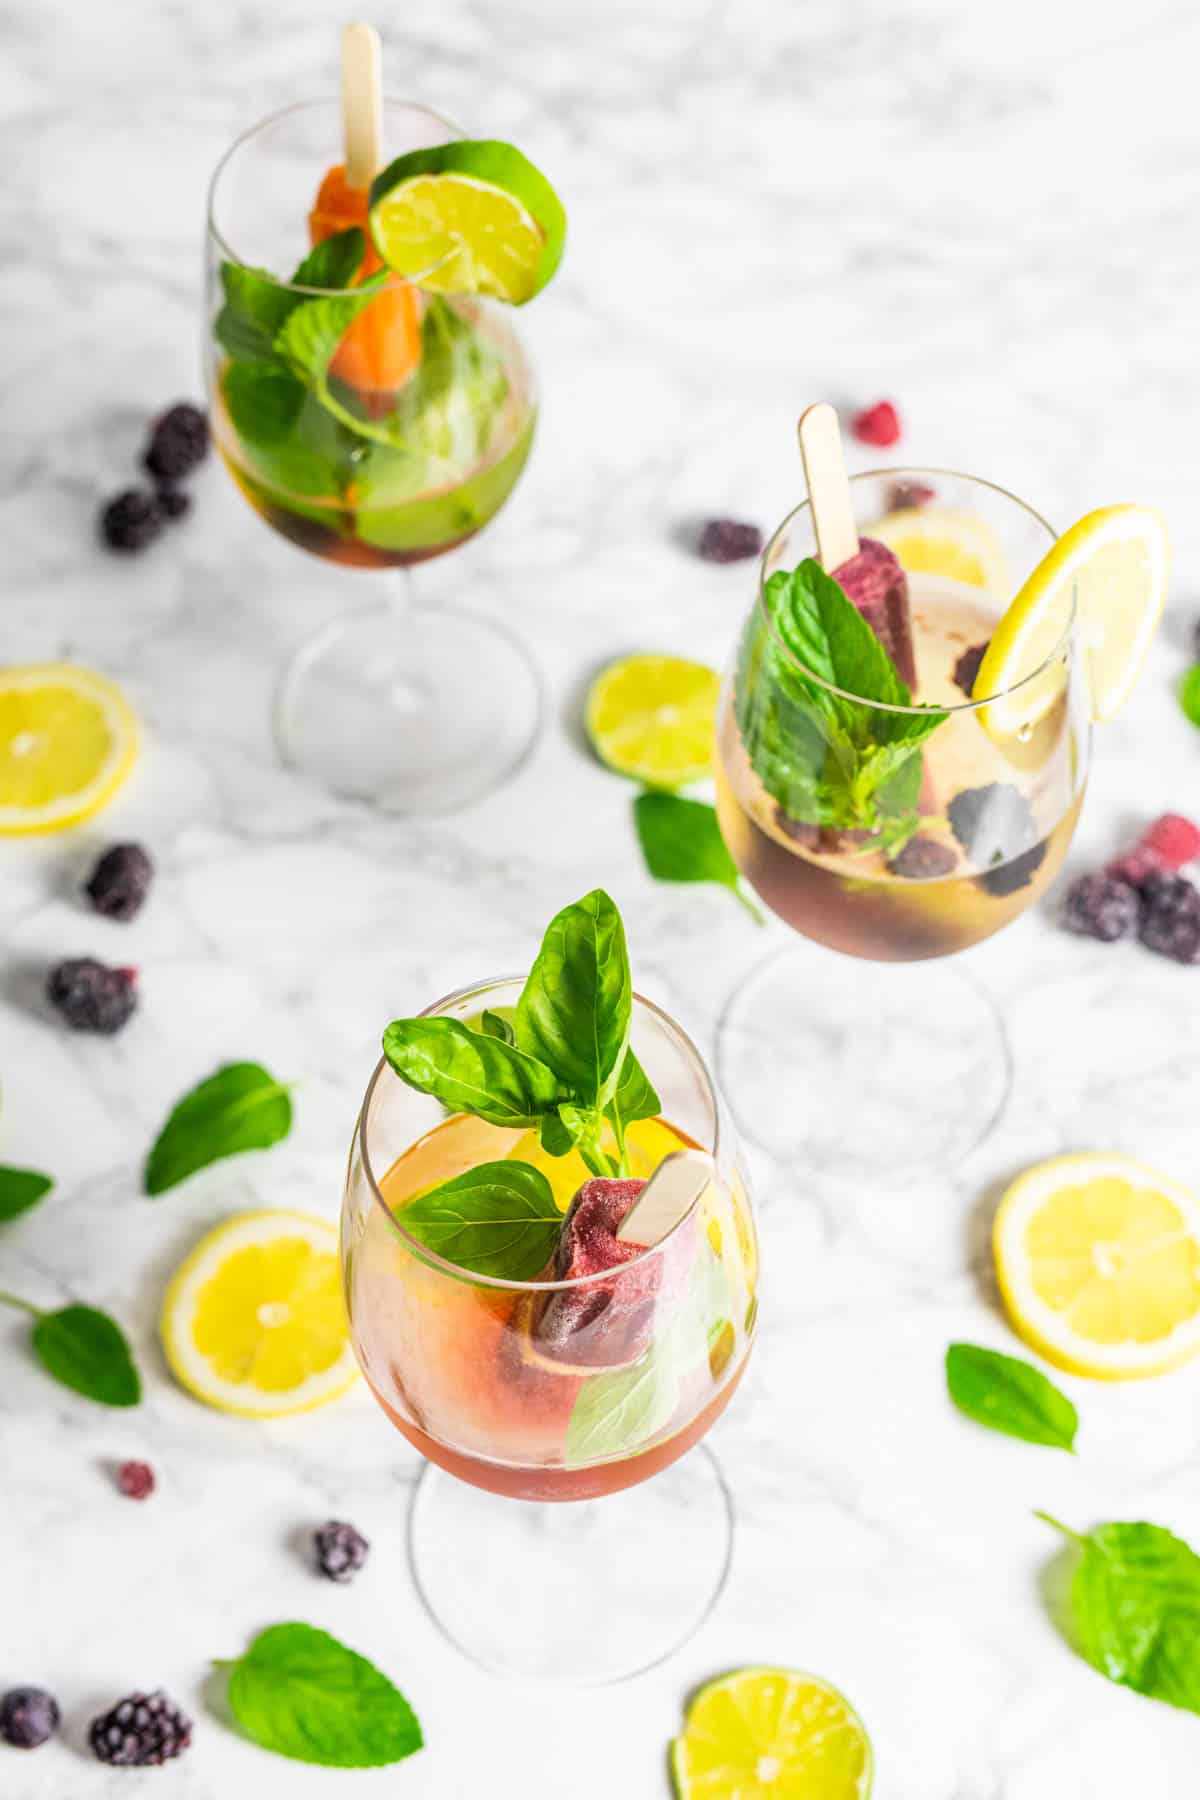 Three glasses of wine with a popsicle, lemon and lime slices, and fresh herbs